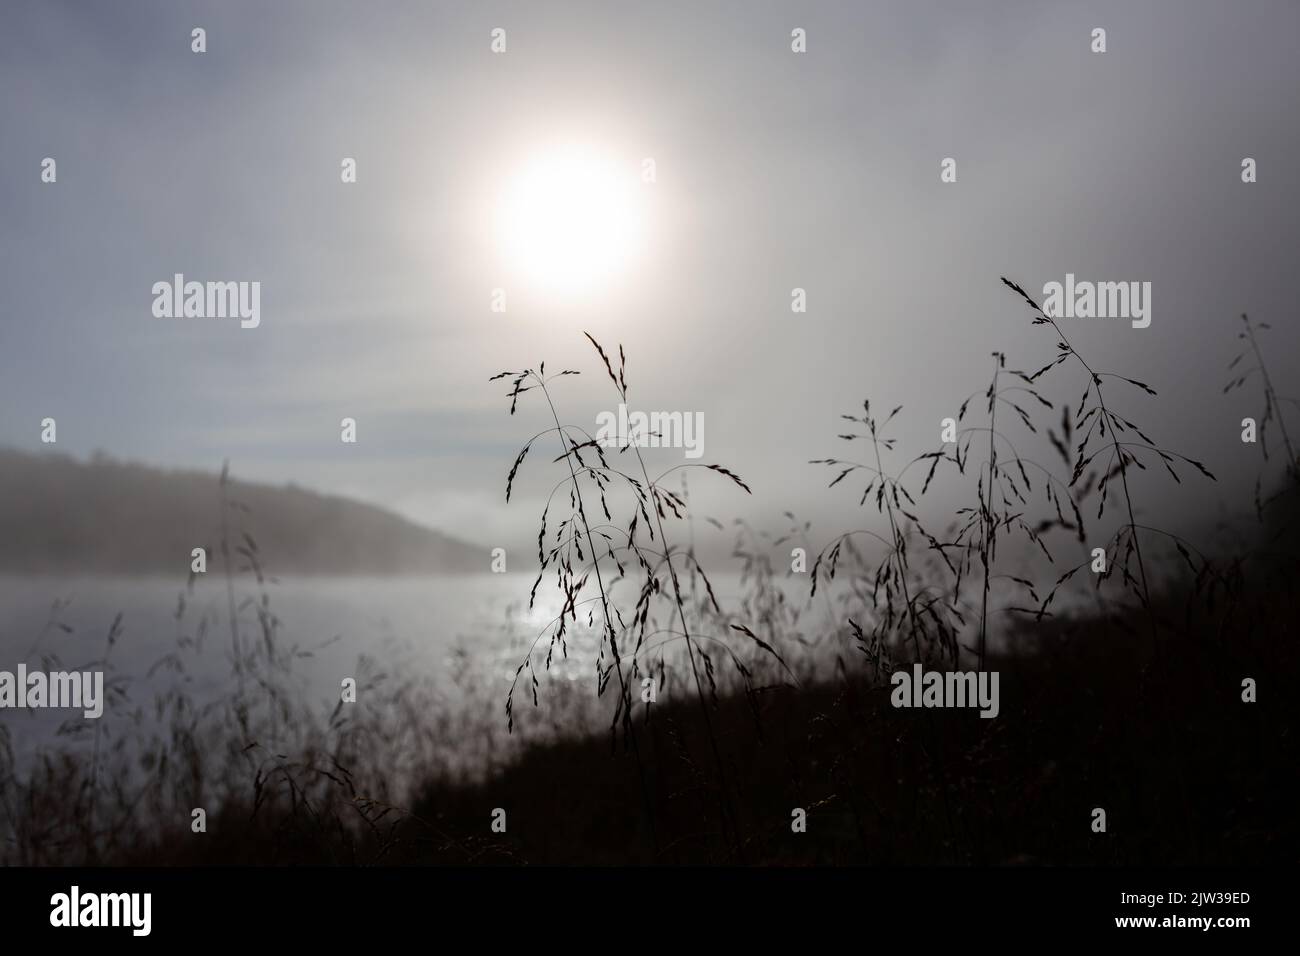 Hay in the foreground, silhouette image. In the background is the river Teno in Finnish Lapland. Foggy, early morning. The atmosphere is slow and calm Stock Photo